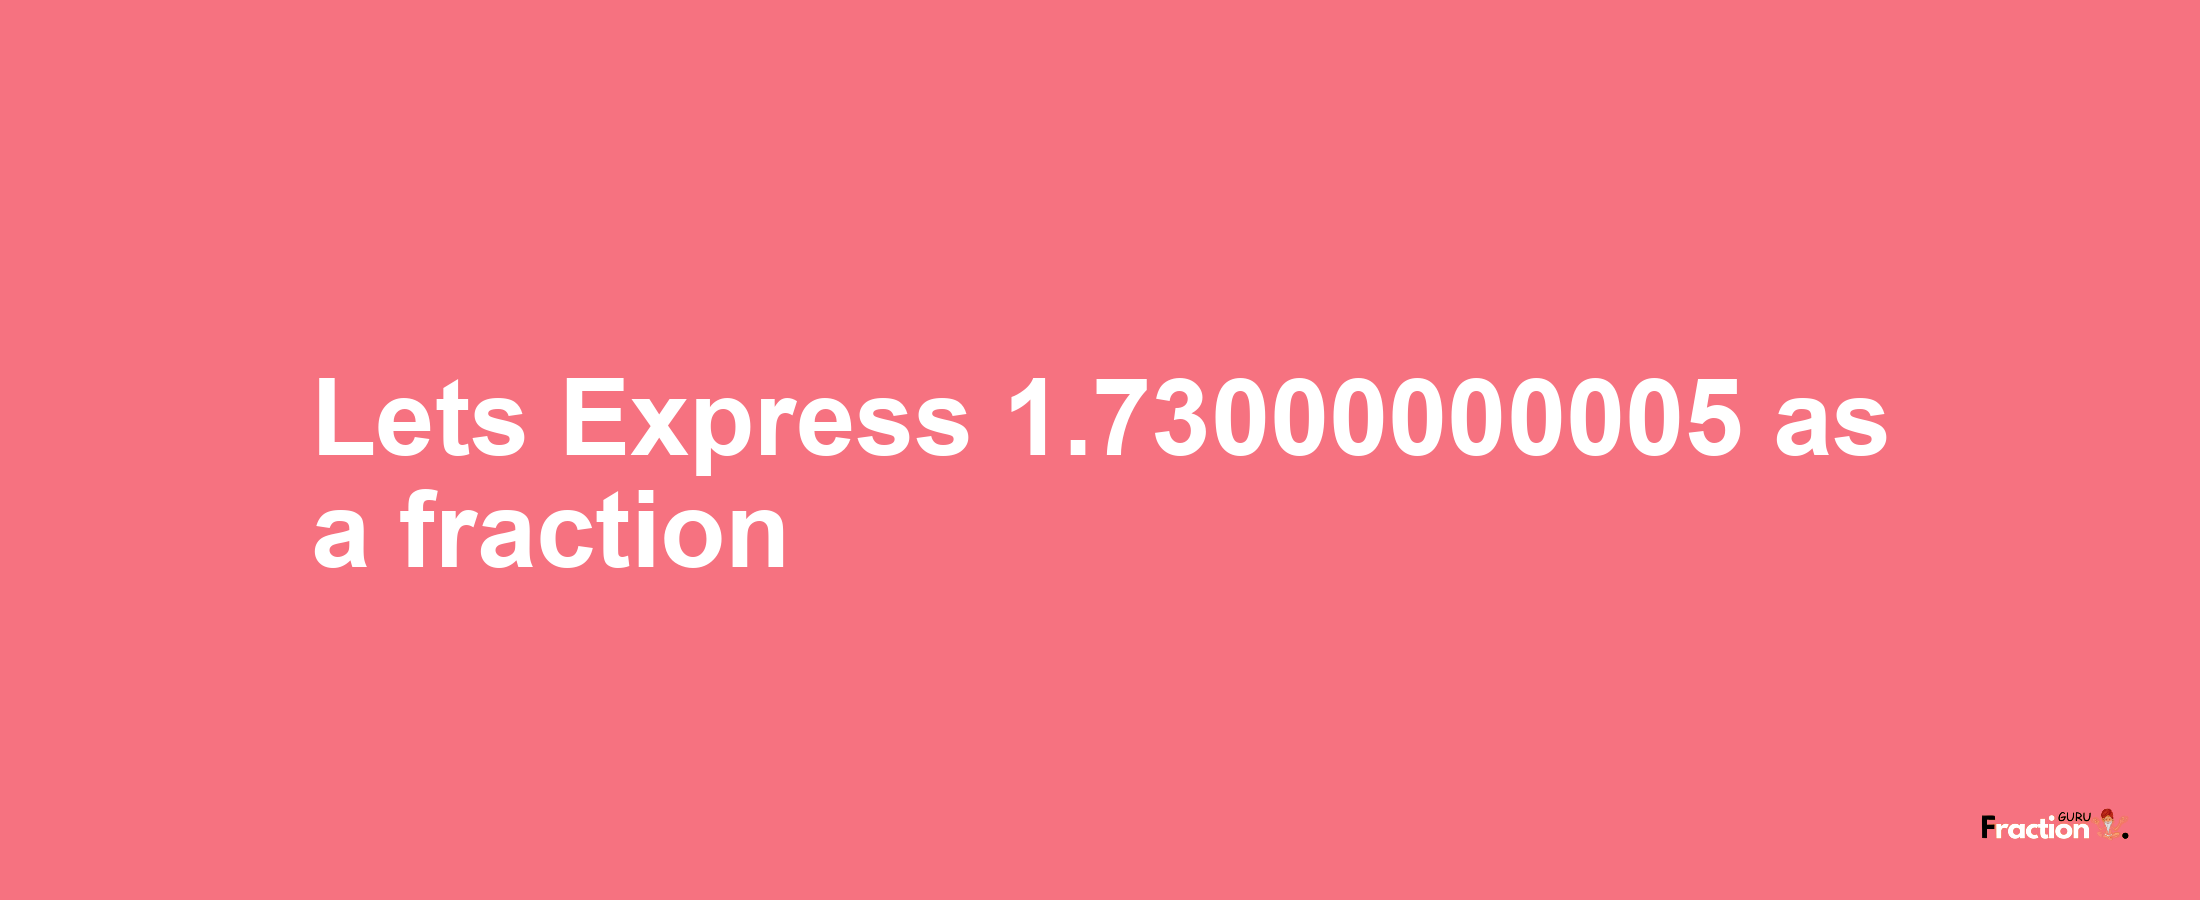 Lets Express 1.73000000005 as afraction